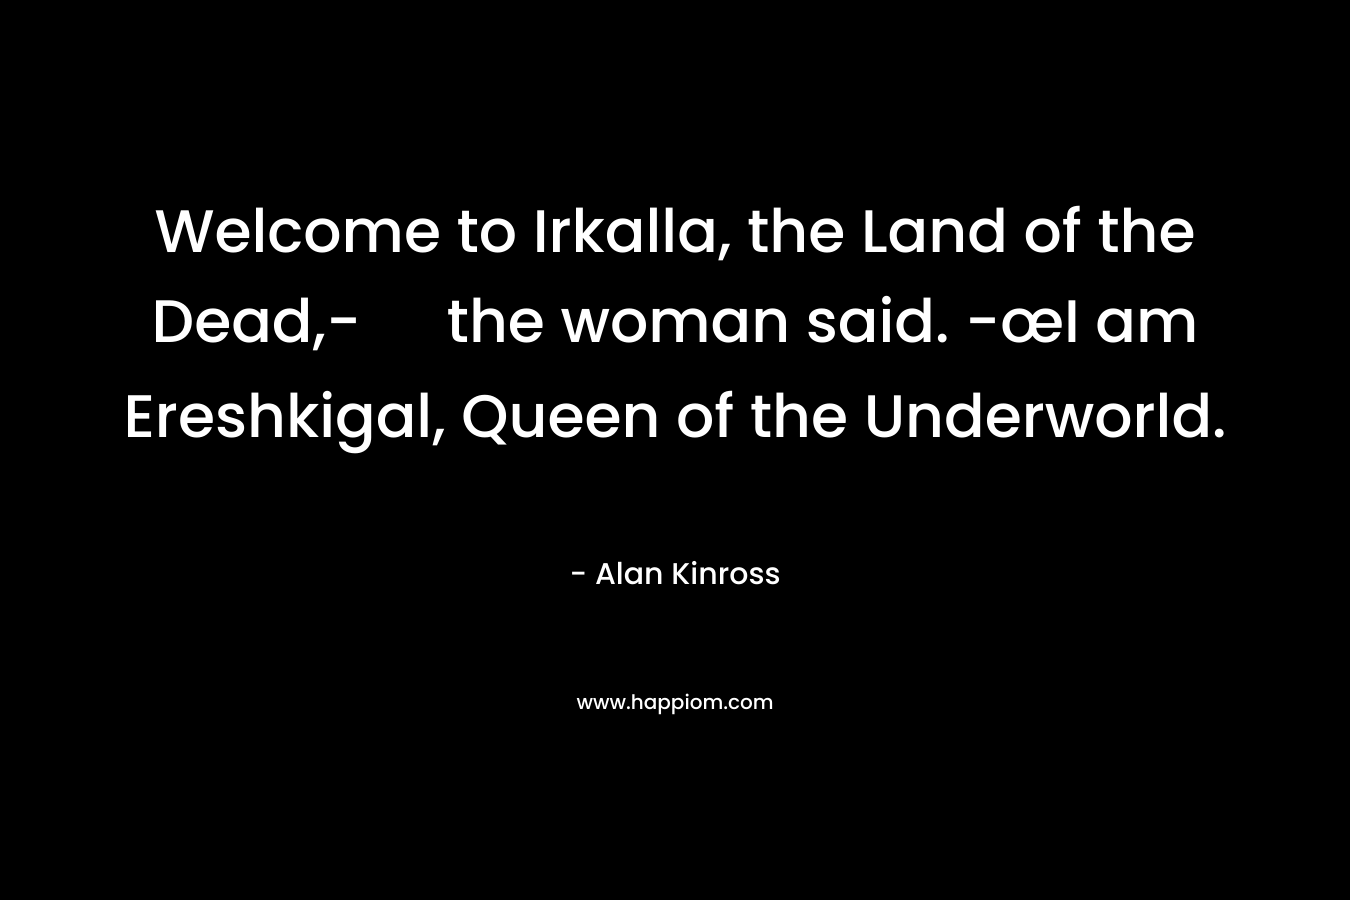 Welcome to Irkalla, the Land of the Dead,- the woman said. -œI am Ereshkigal, Queen of the Underworld. – Alan Kinross